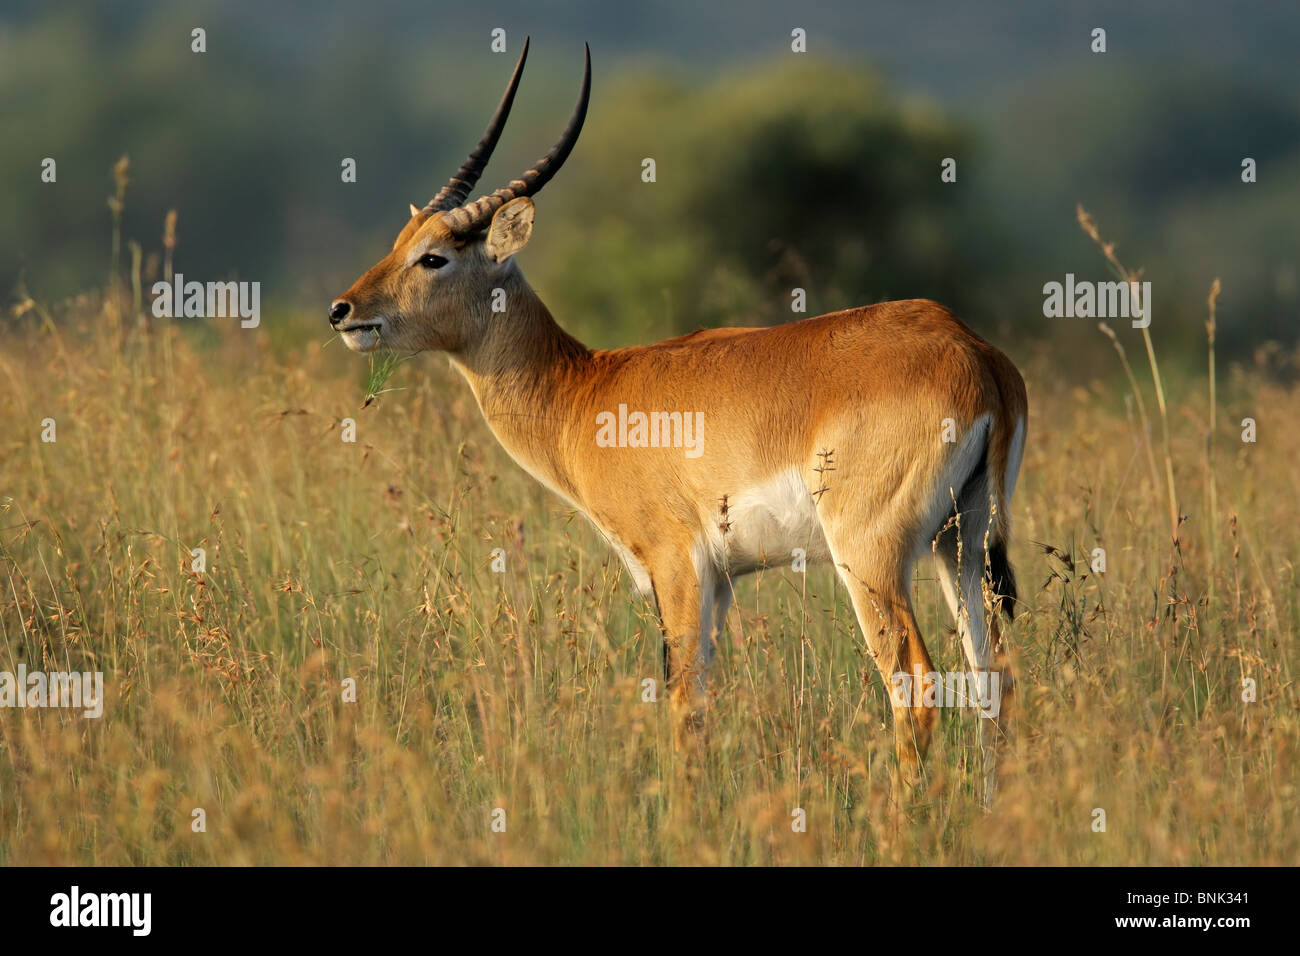 A male red lechwe antelope (Kobus leche), southern Africa Stock Photo